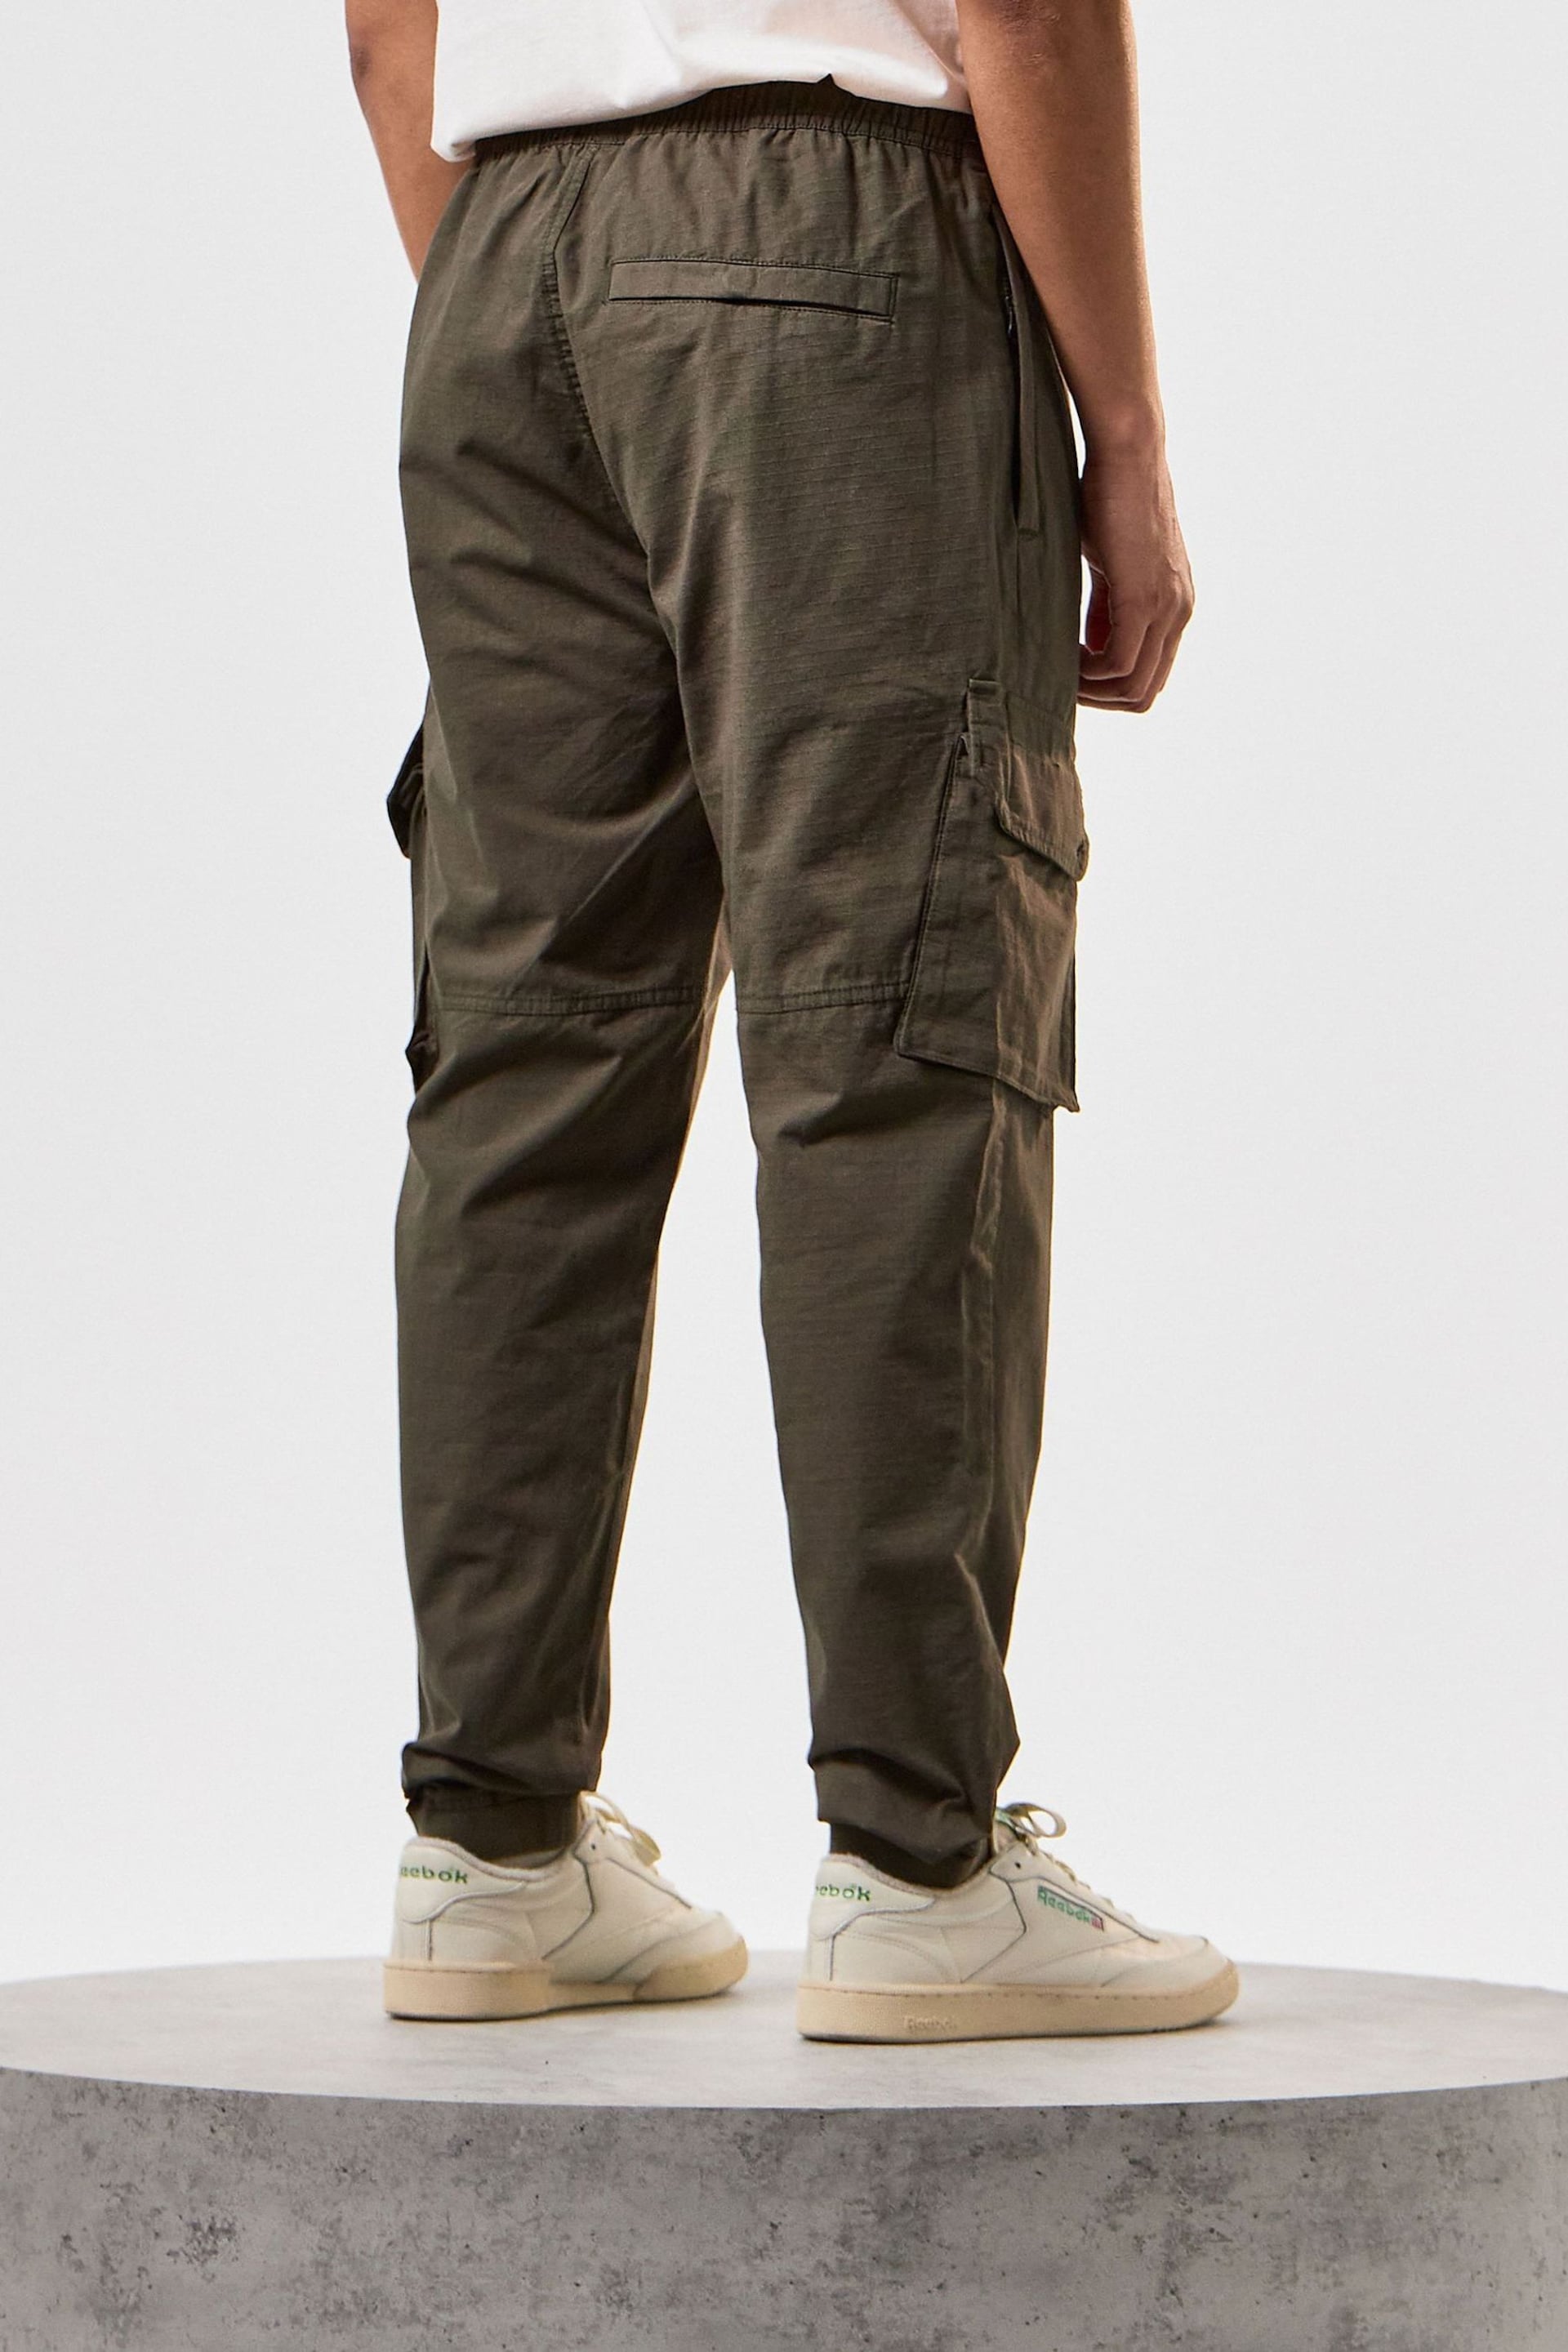 Weekend Offender Pianamo Cargo Trousers - Image 2 of 6